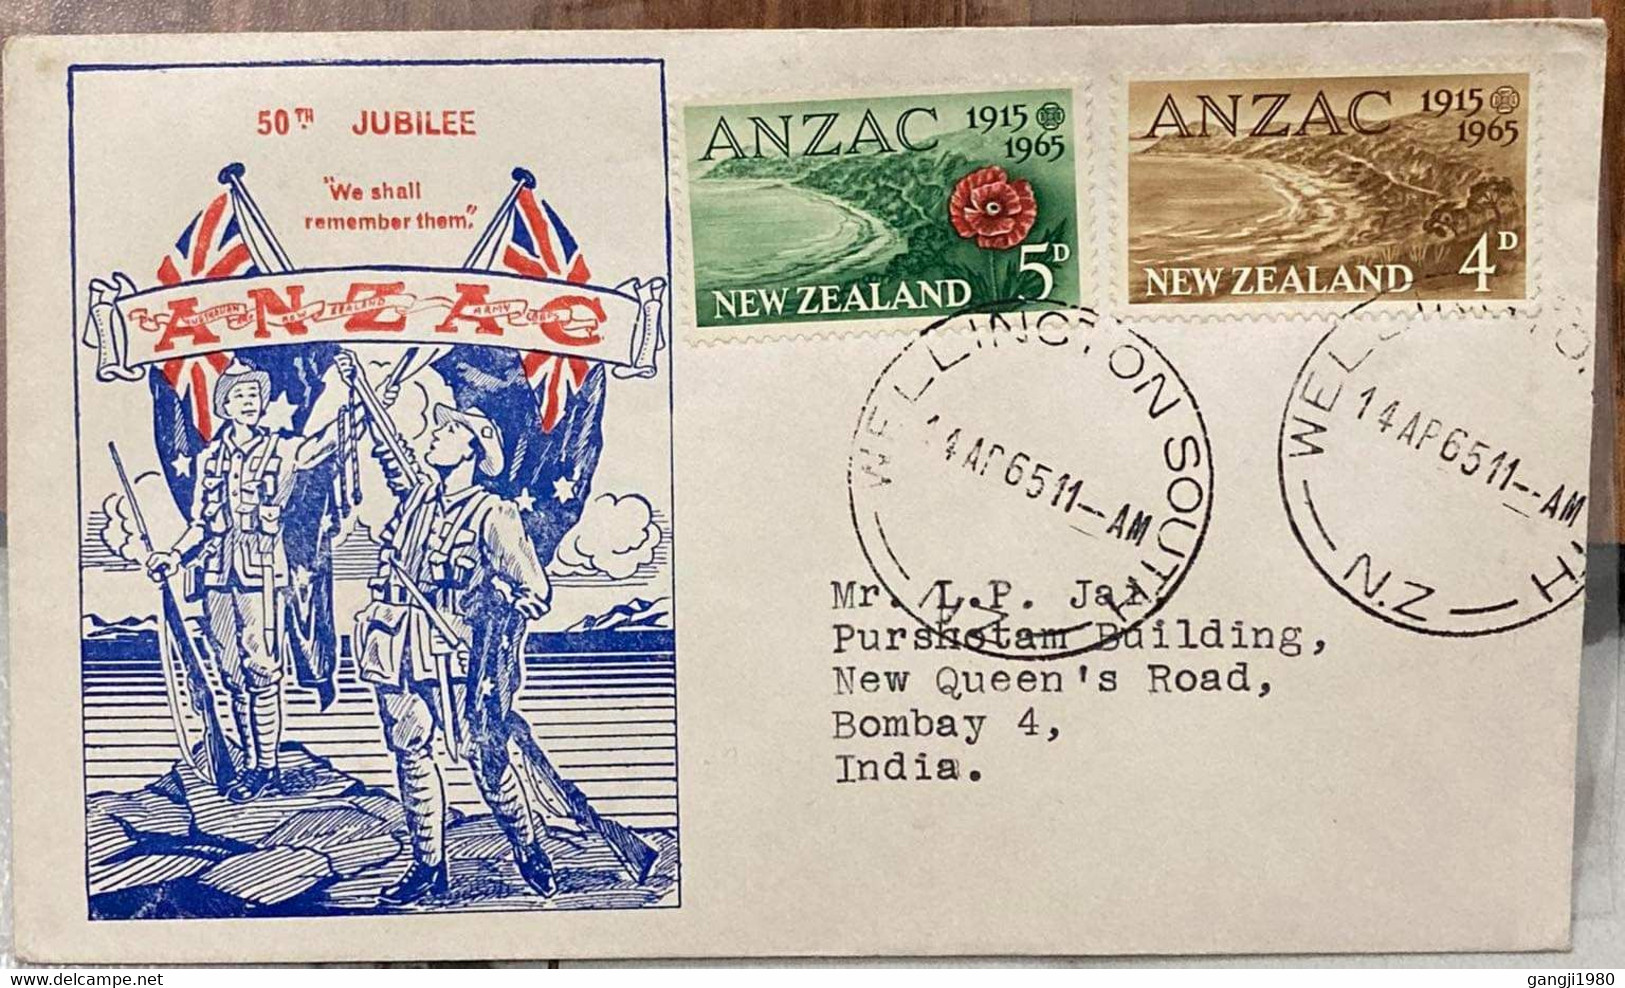 New Zealand,1965.private Fdc, ANZAC,welling Town South, POST MARK,TO ,INDIA,TO ADDRESS,L.P.JAI ,Cricketer. - Lettres & Documents